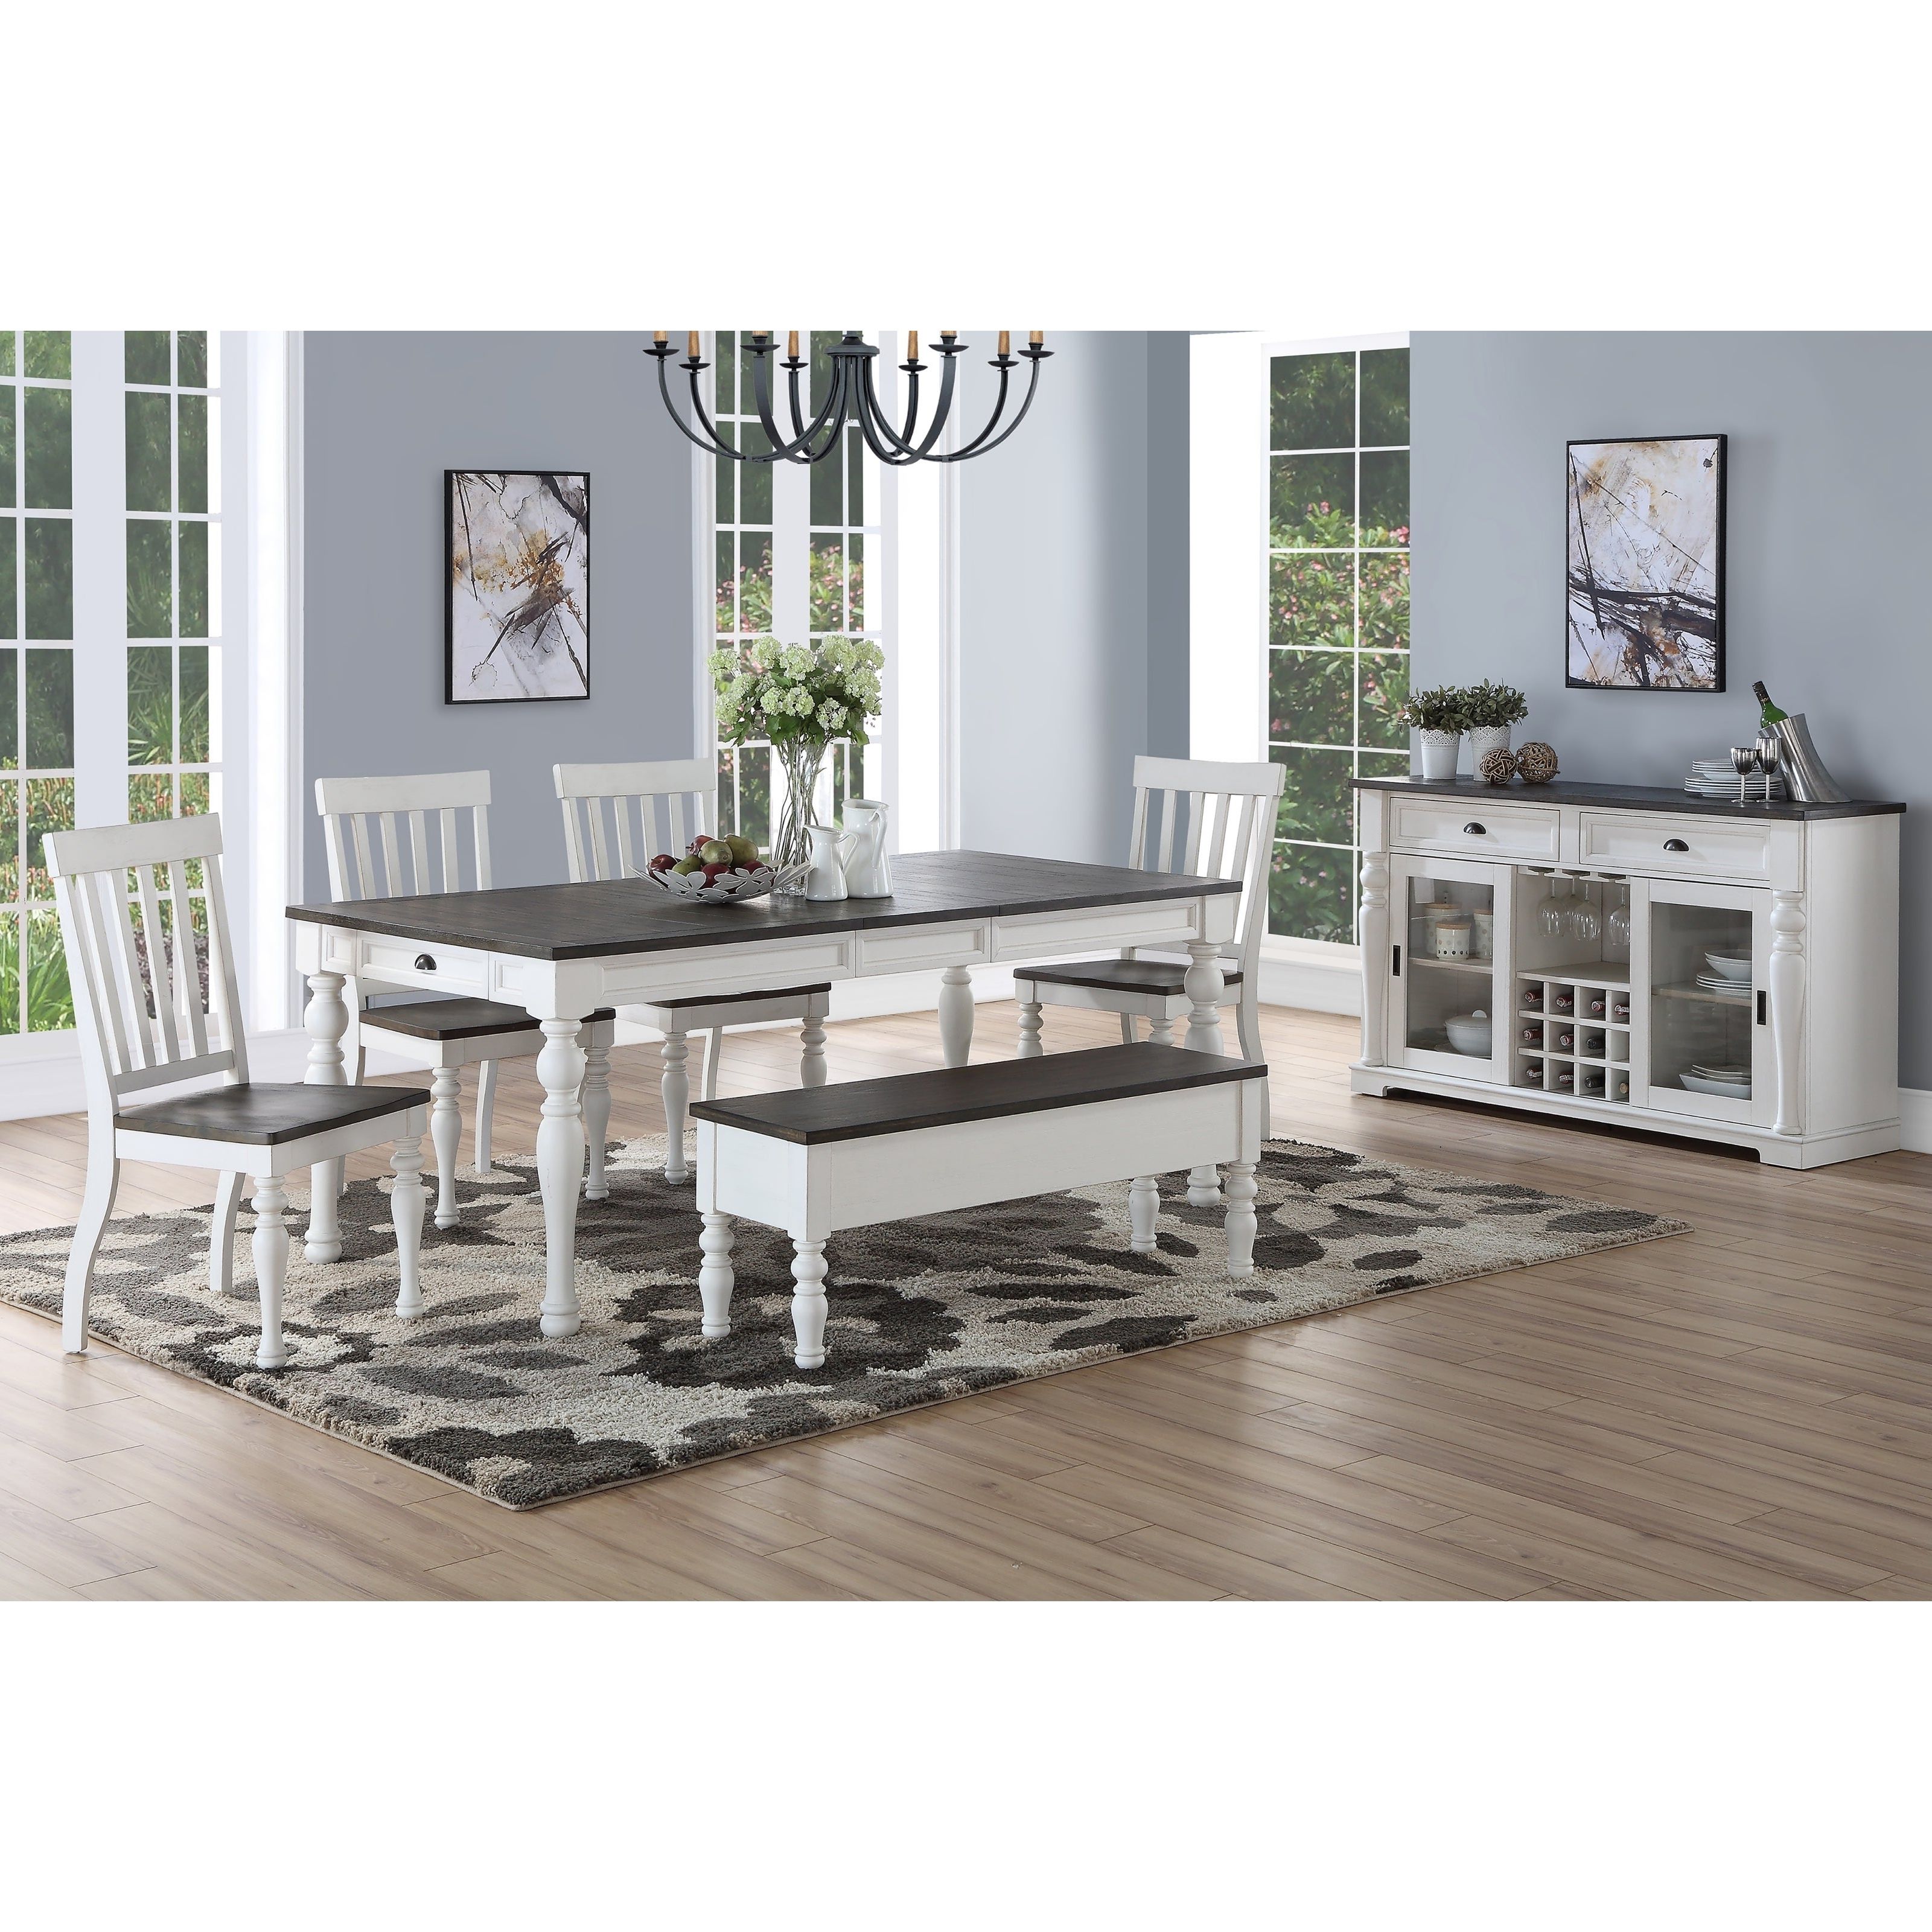 Osterman 6 Piece Extendable Dining Sets (set Of 6) With Fashionable Buy 6 Piece Sets Kitchen & Dining Room Sets Online At Overstock (View 4 of 20)